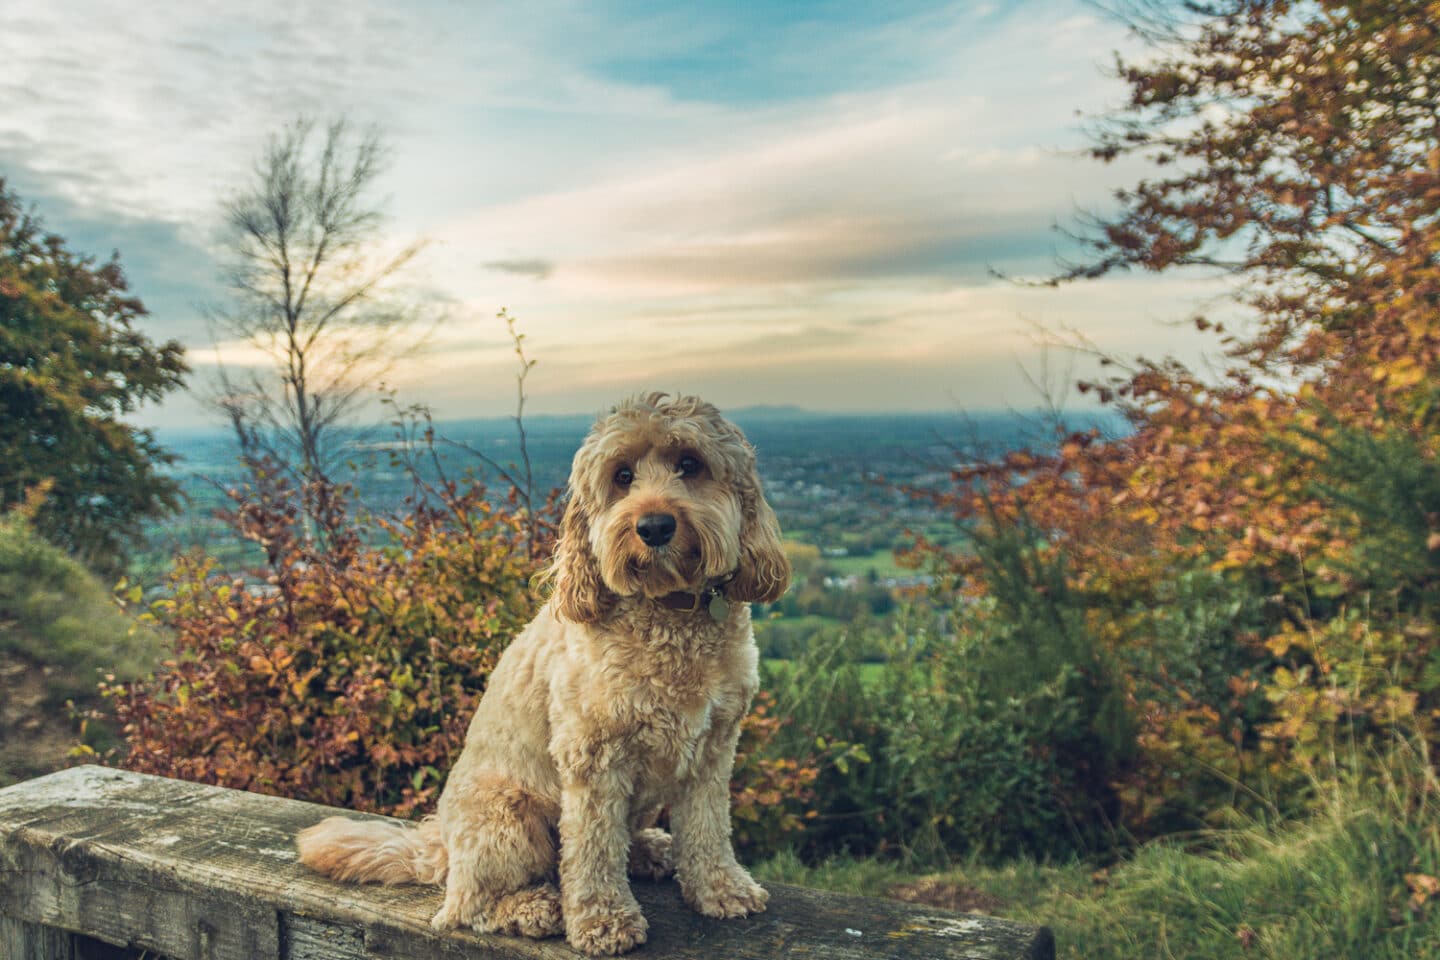 Cute dog sitting on a bench at sunset with autumn trees in the background while on a dog walk. 